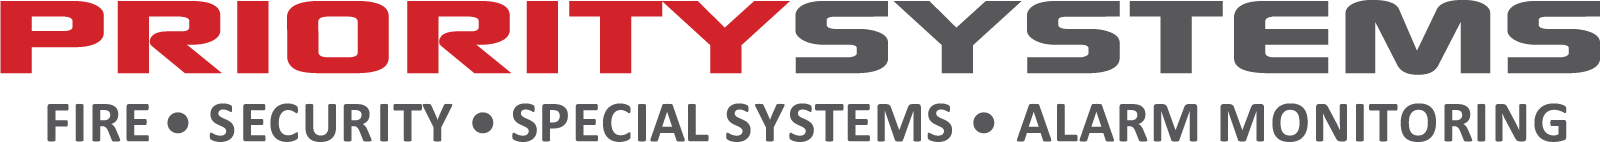 Priority Systems Logo